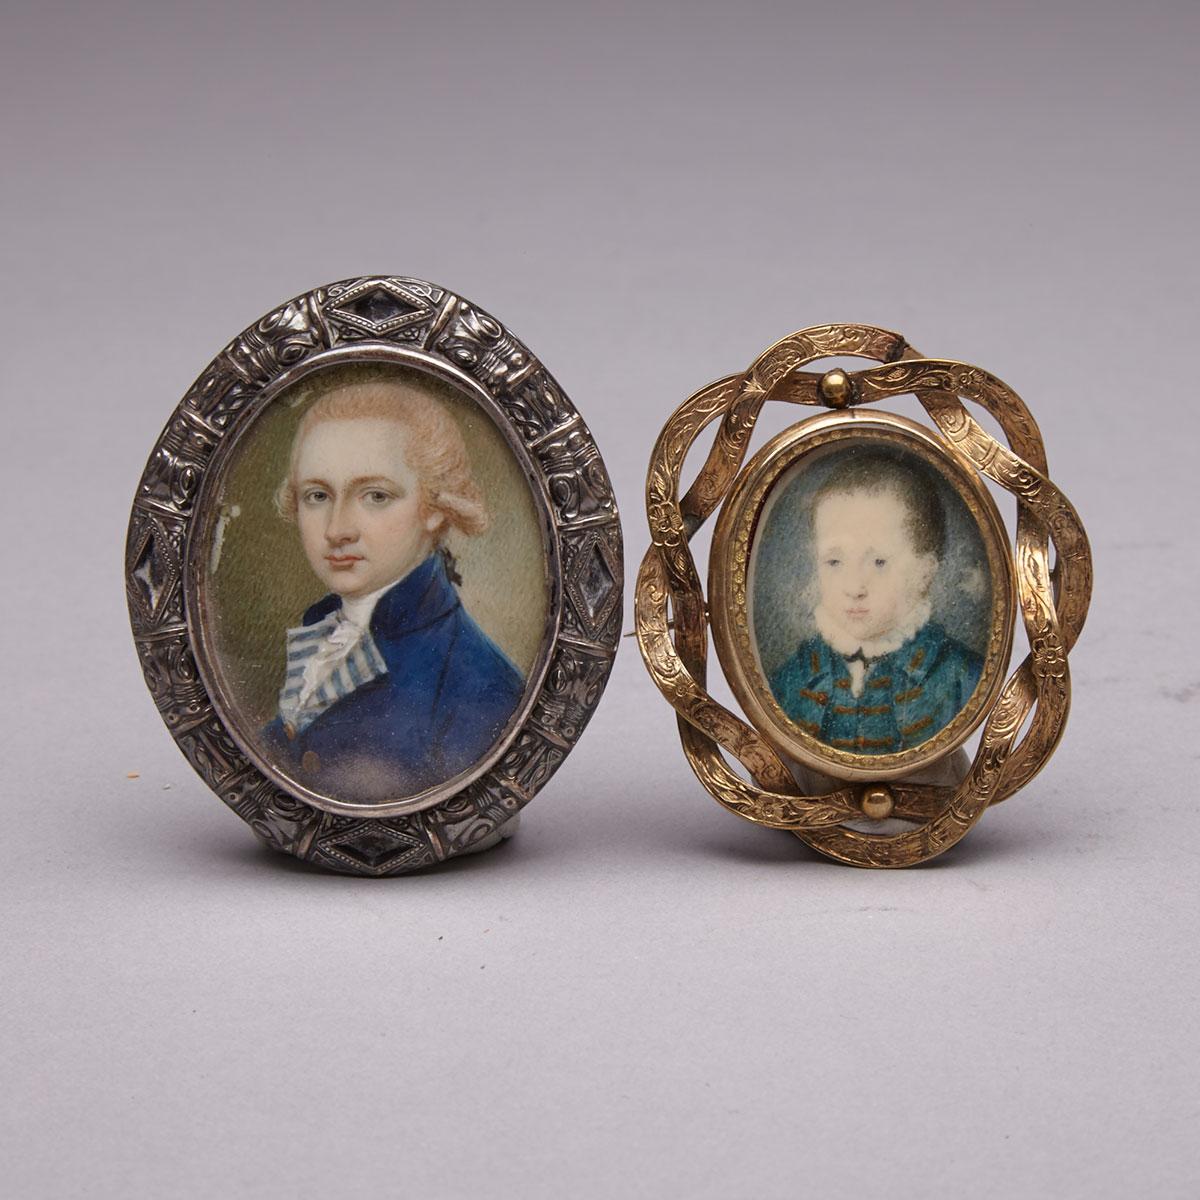 Two British School Portrait Miniatures on Ivory, late 18th/early 19th century